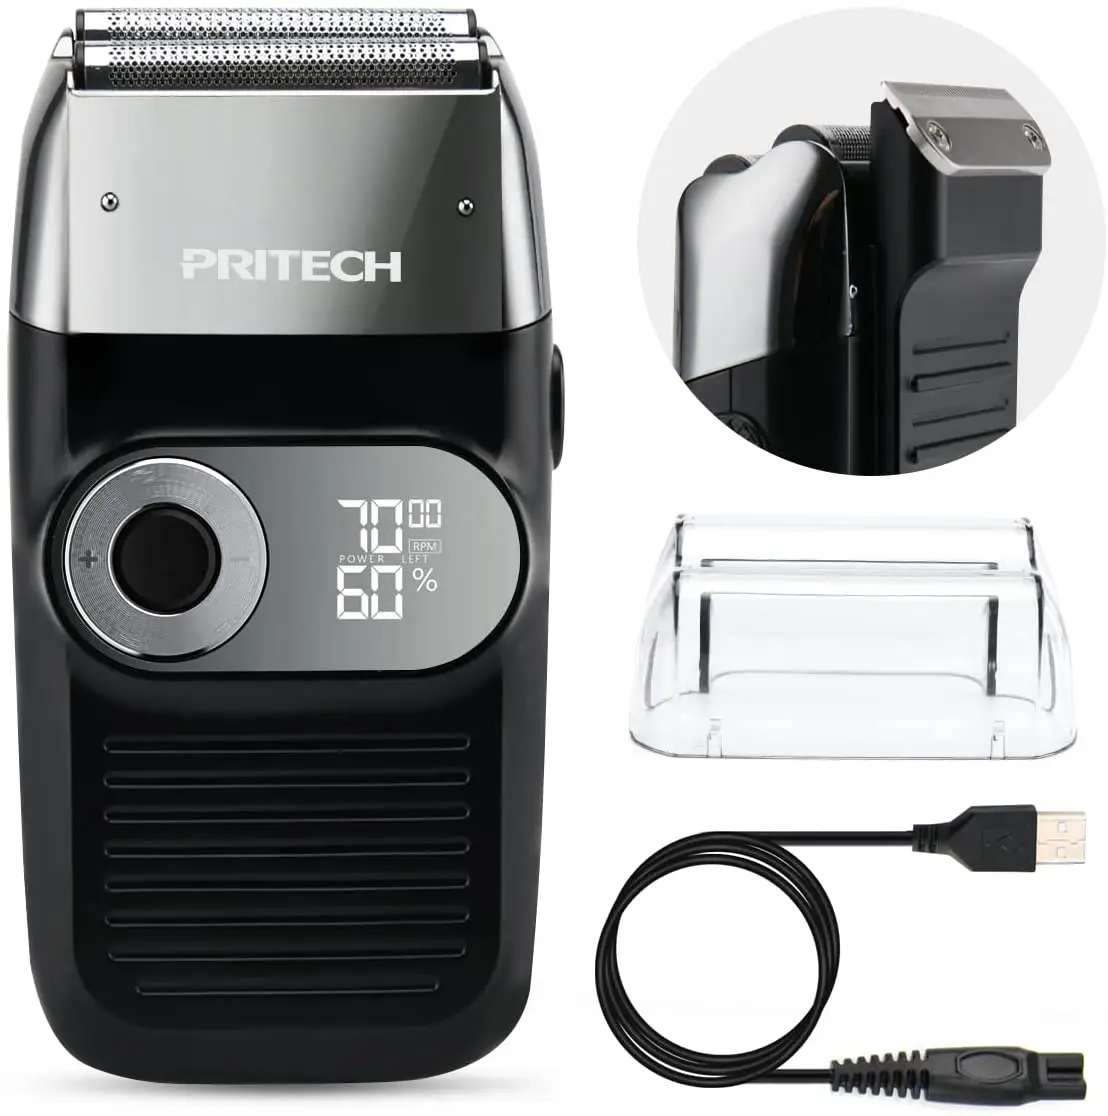 PRITECH LCD Display Cordless Portable USB Rechargeable Balding Hair Trimmer And Electric Shaver For Men